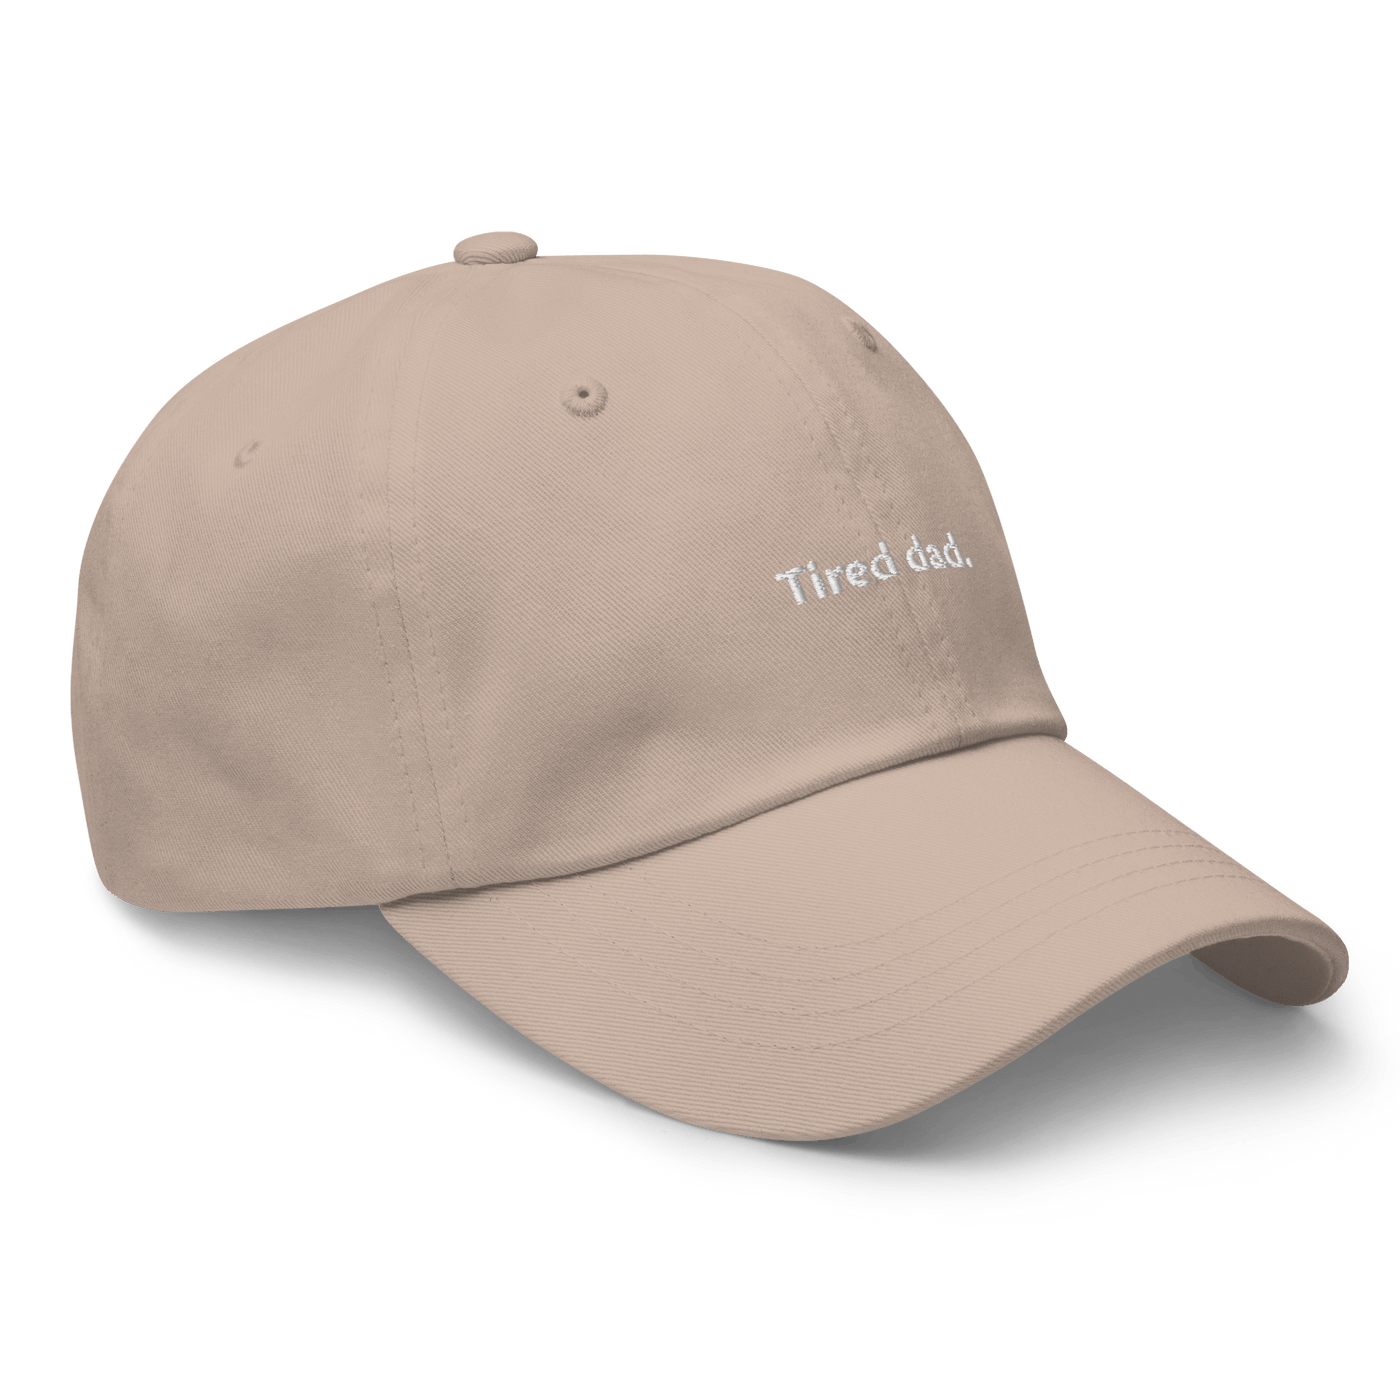 Tired Dad Hat - Stone - - Just Another Cap Store